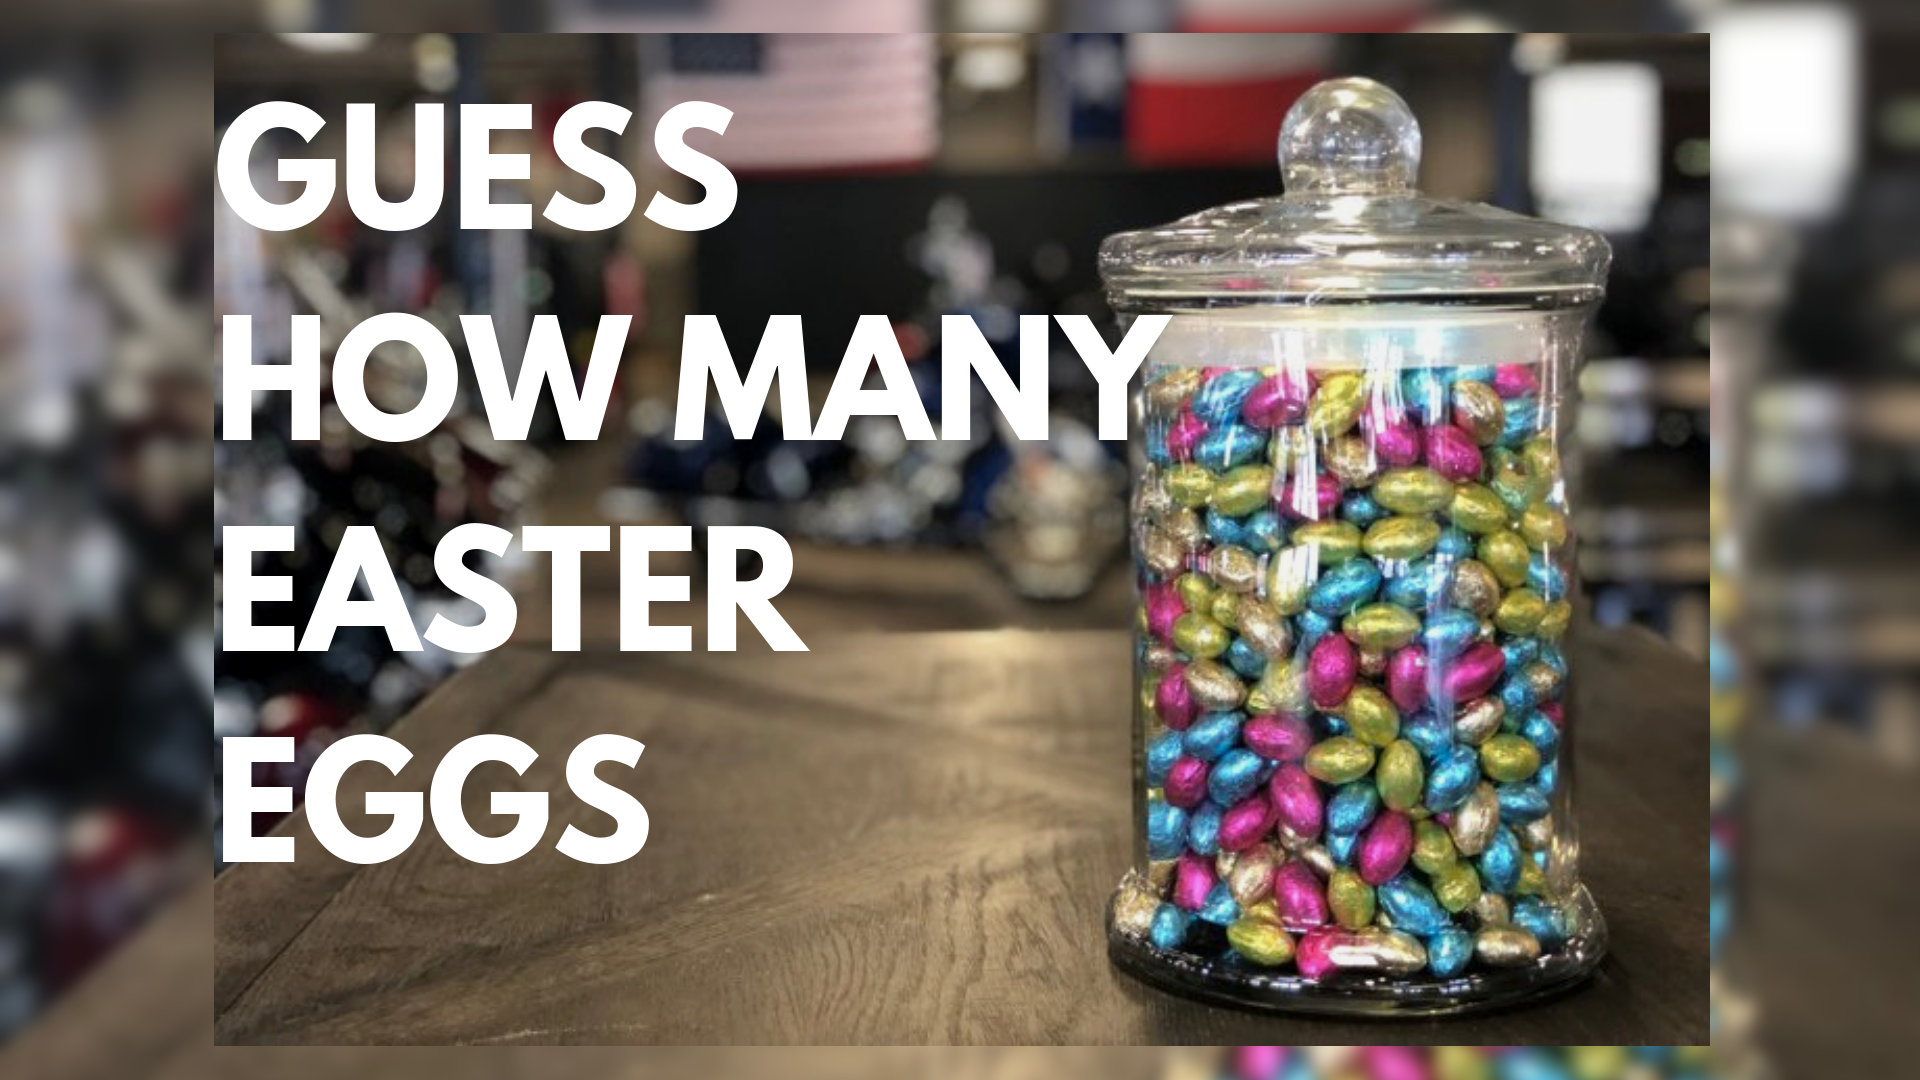 Can you guess how many Easter Eggs are the jar? MyParisTexas